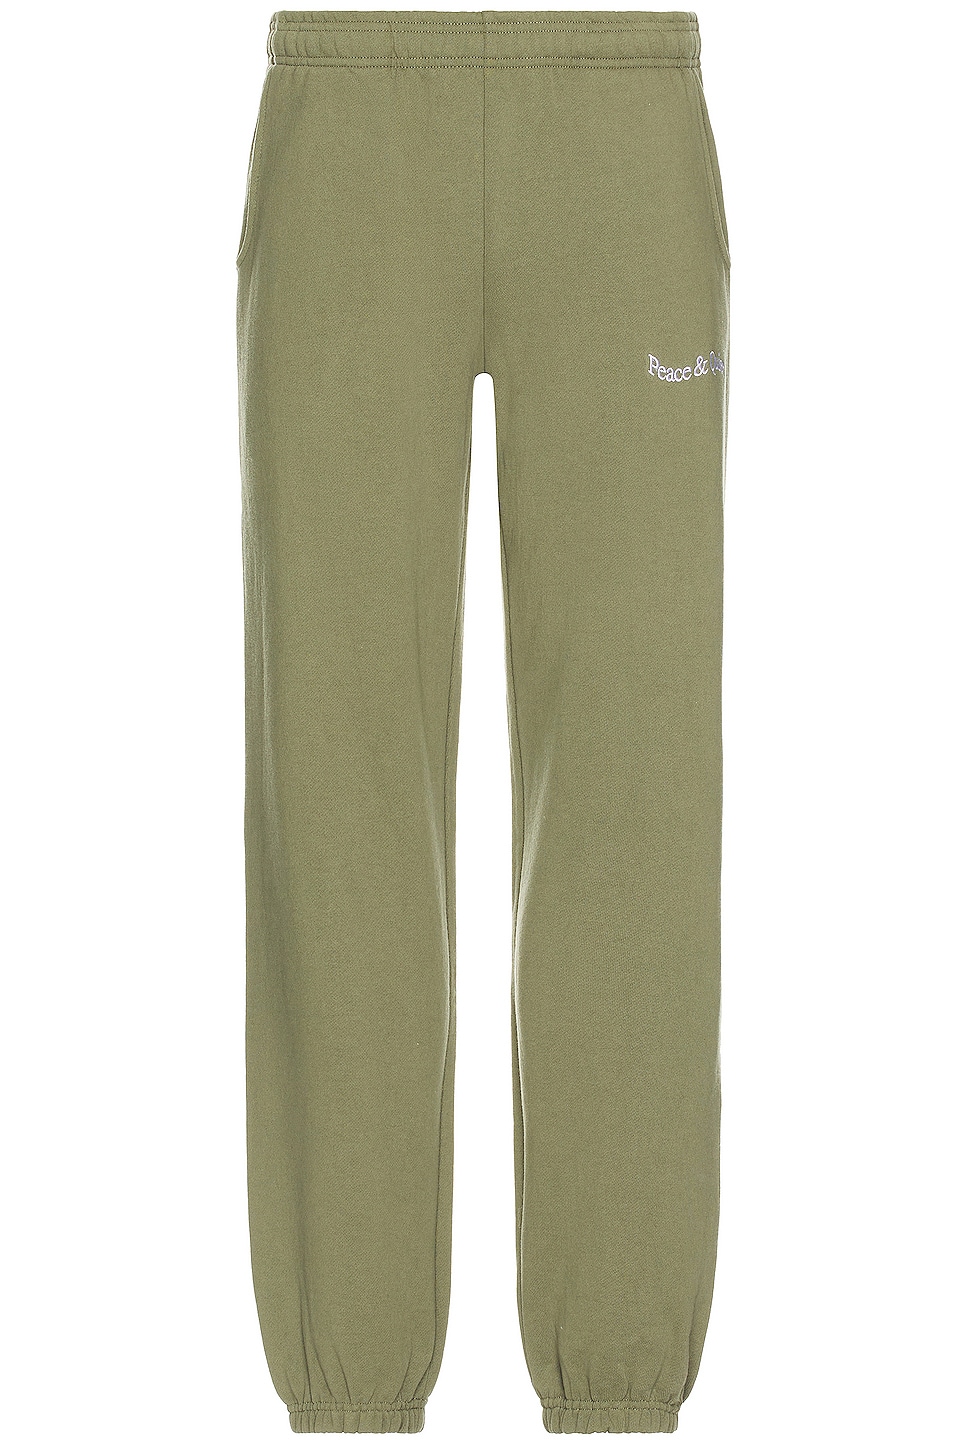 Image 1 of Museum of Peace and Quiet Wordmark Sweatpants in Olive